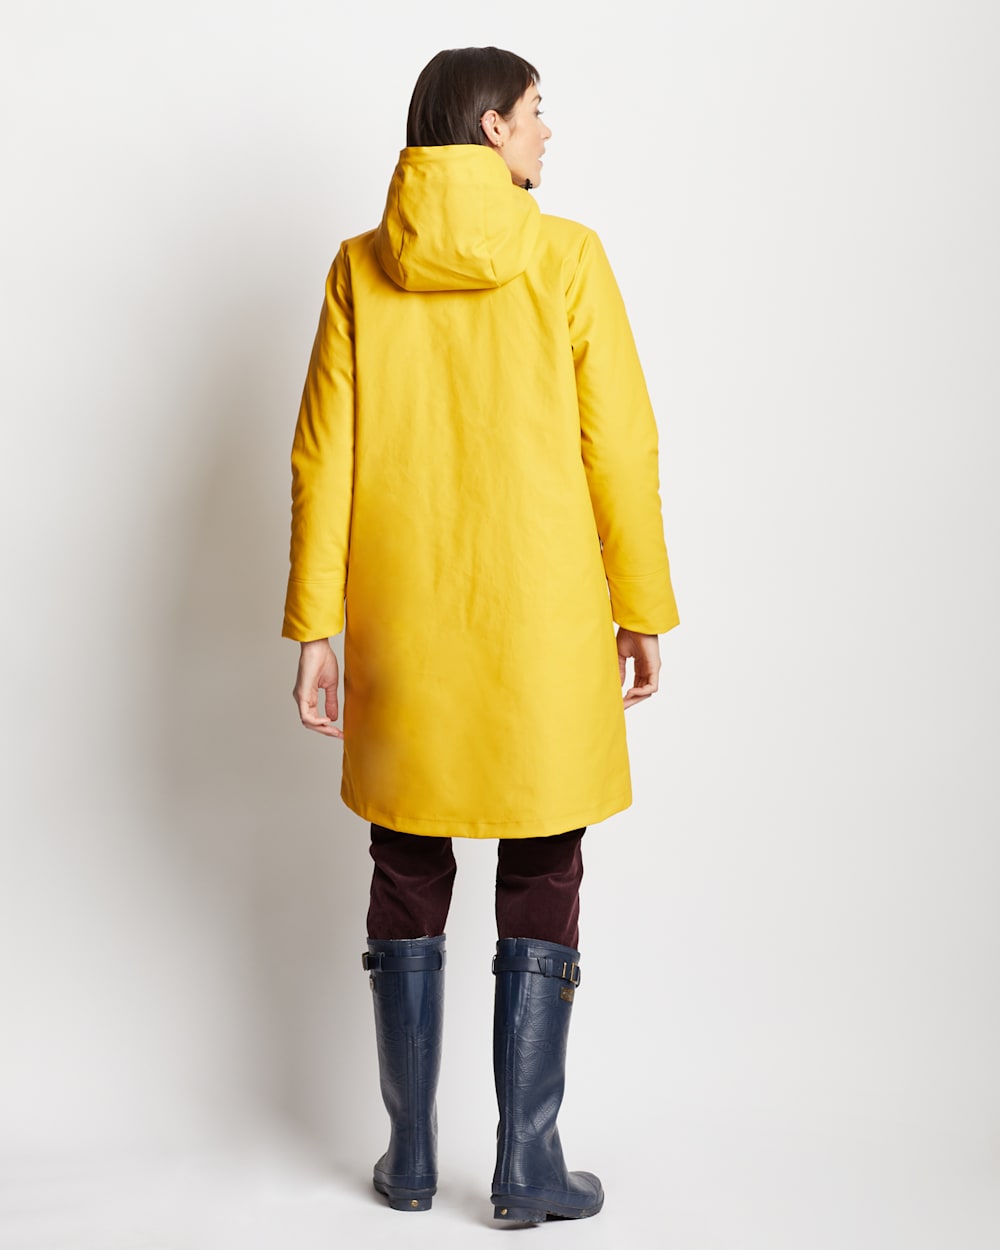 ALTERNATE VIEW OF WOMEN'S VICTORIA A-LINE SLICKER IN YELLOW image number 5